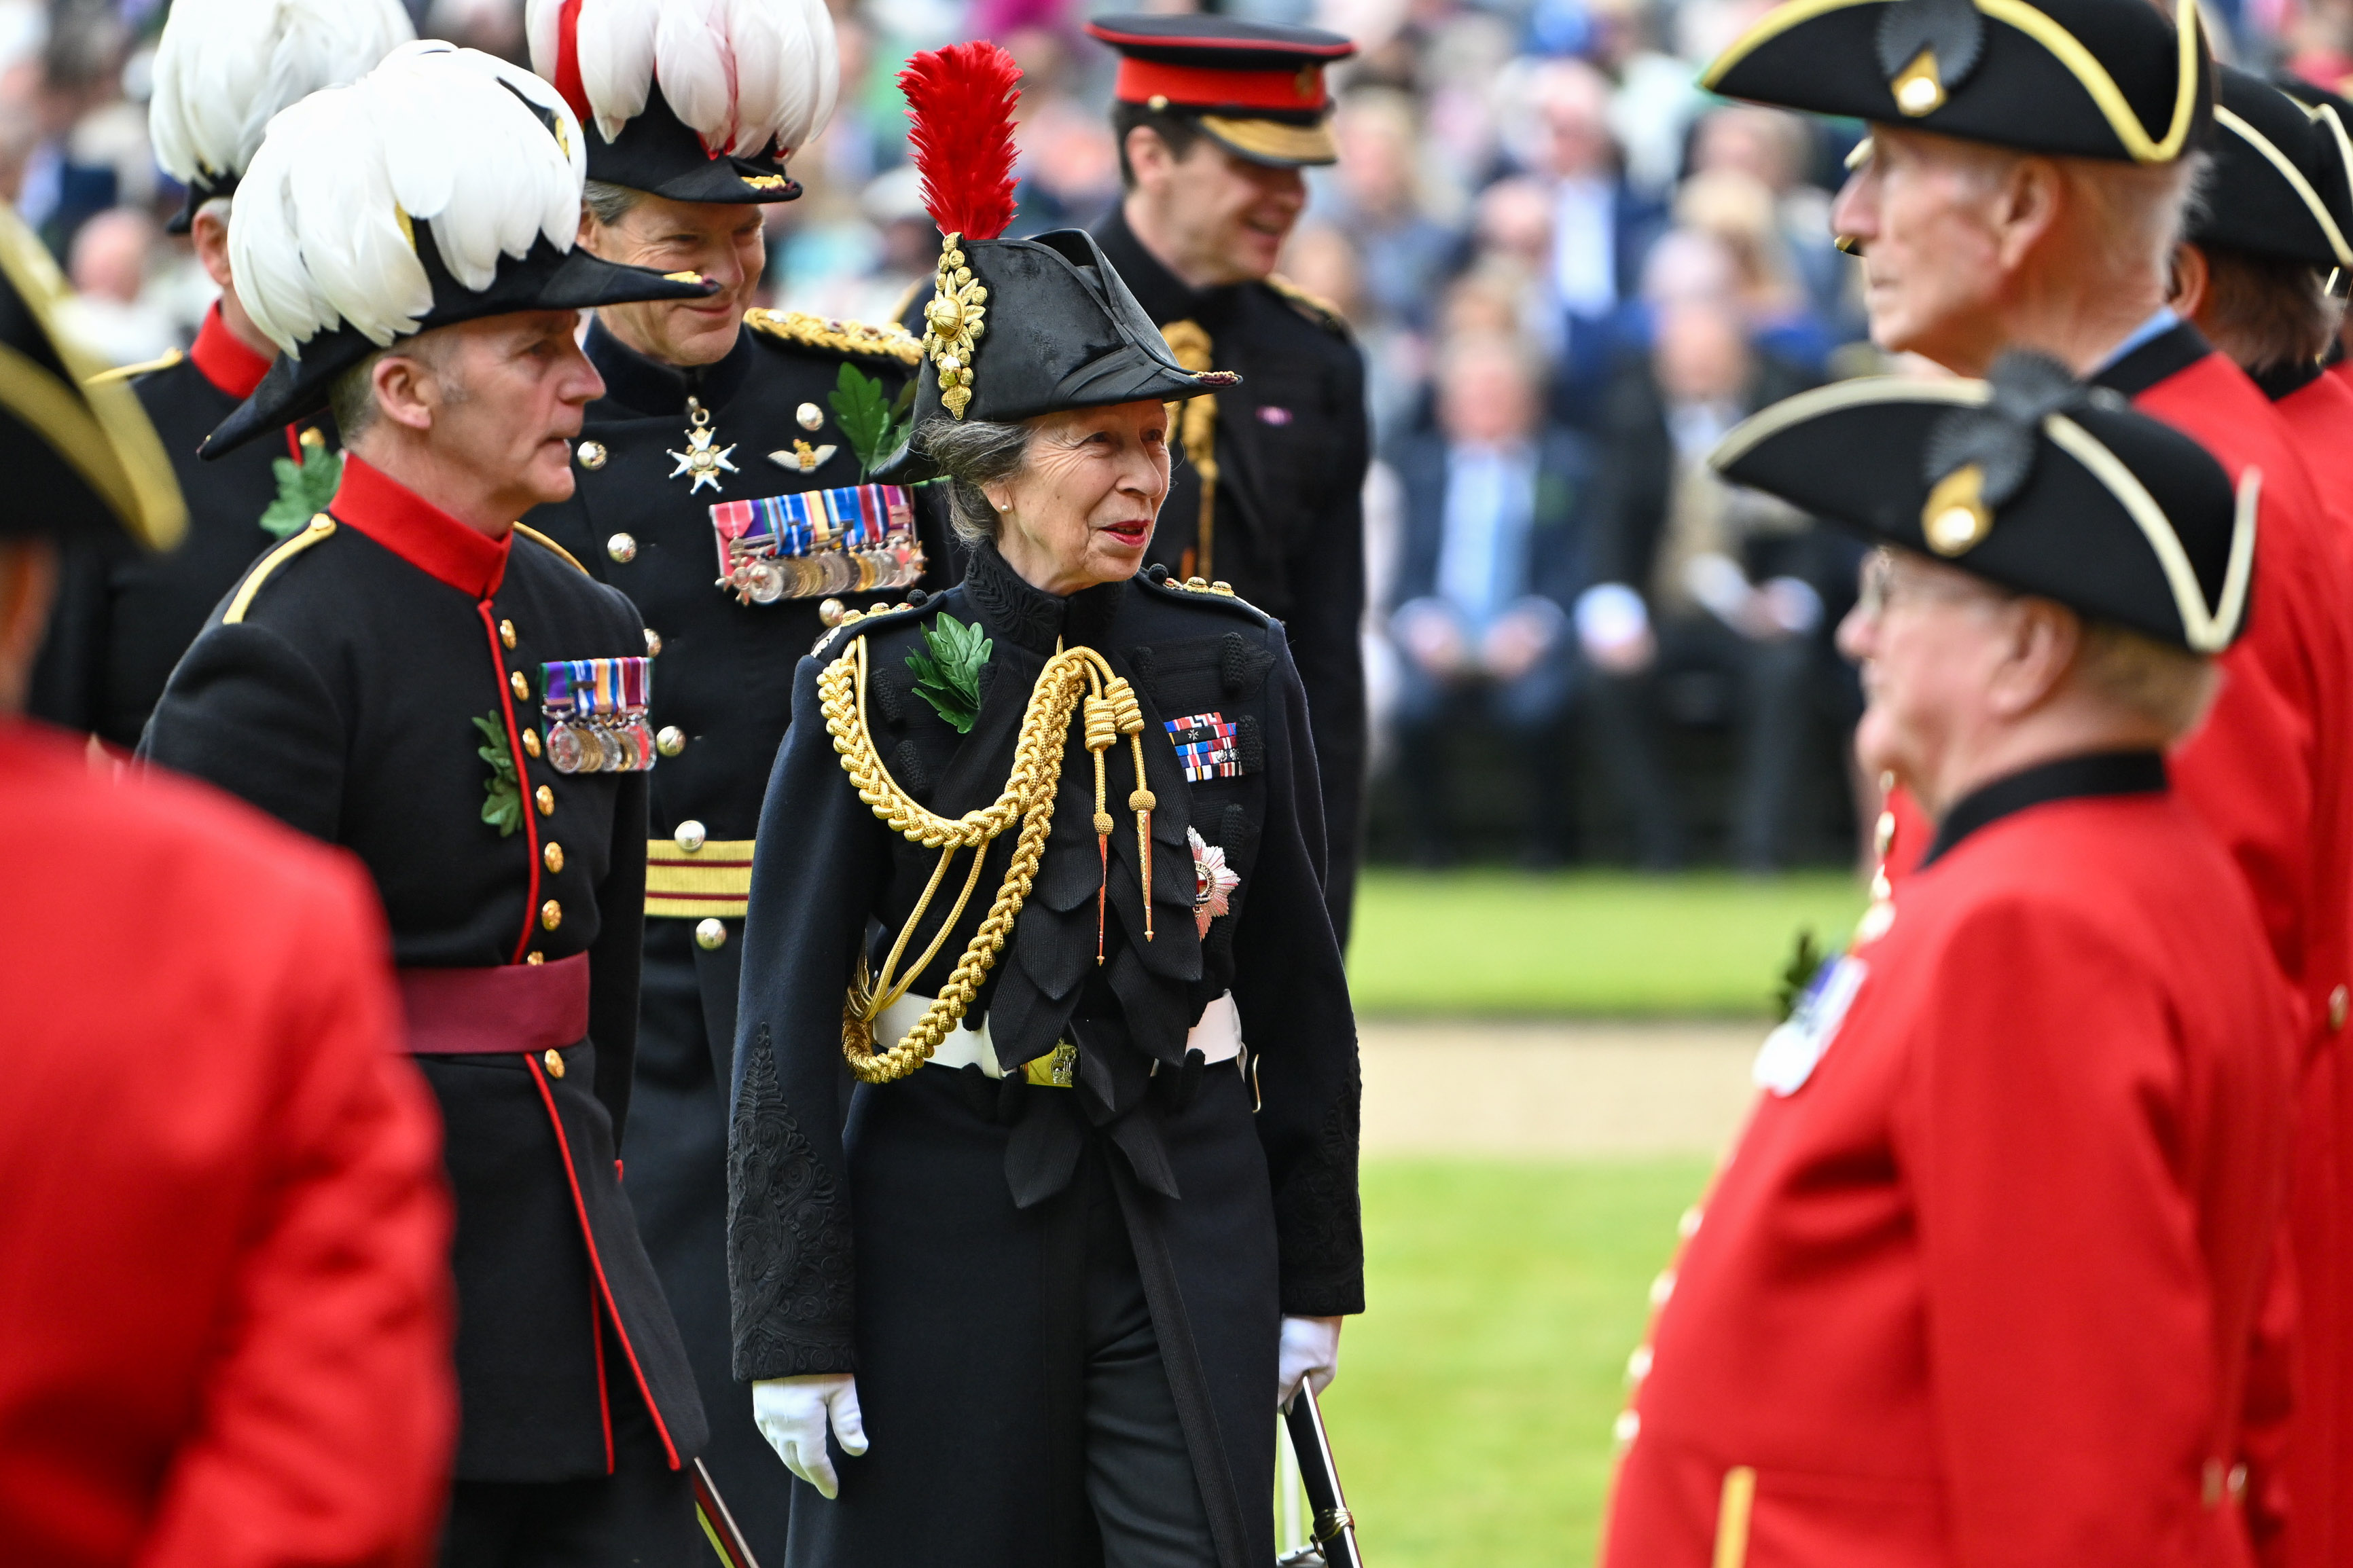 The Princess Royal smiles as she reviews the parade of Chelsea Pensioners at Founders Day